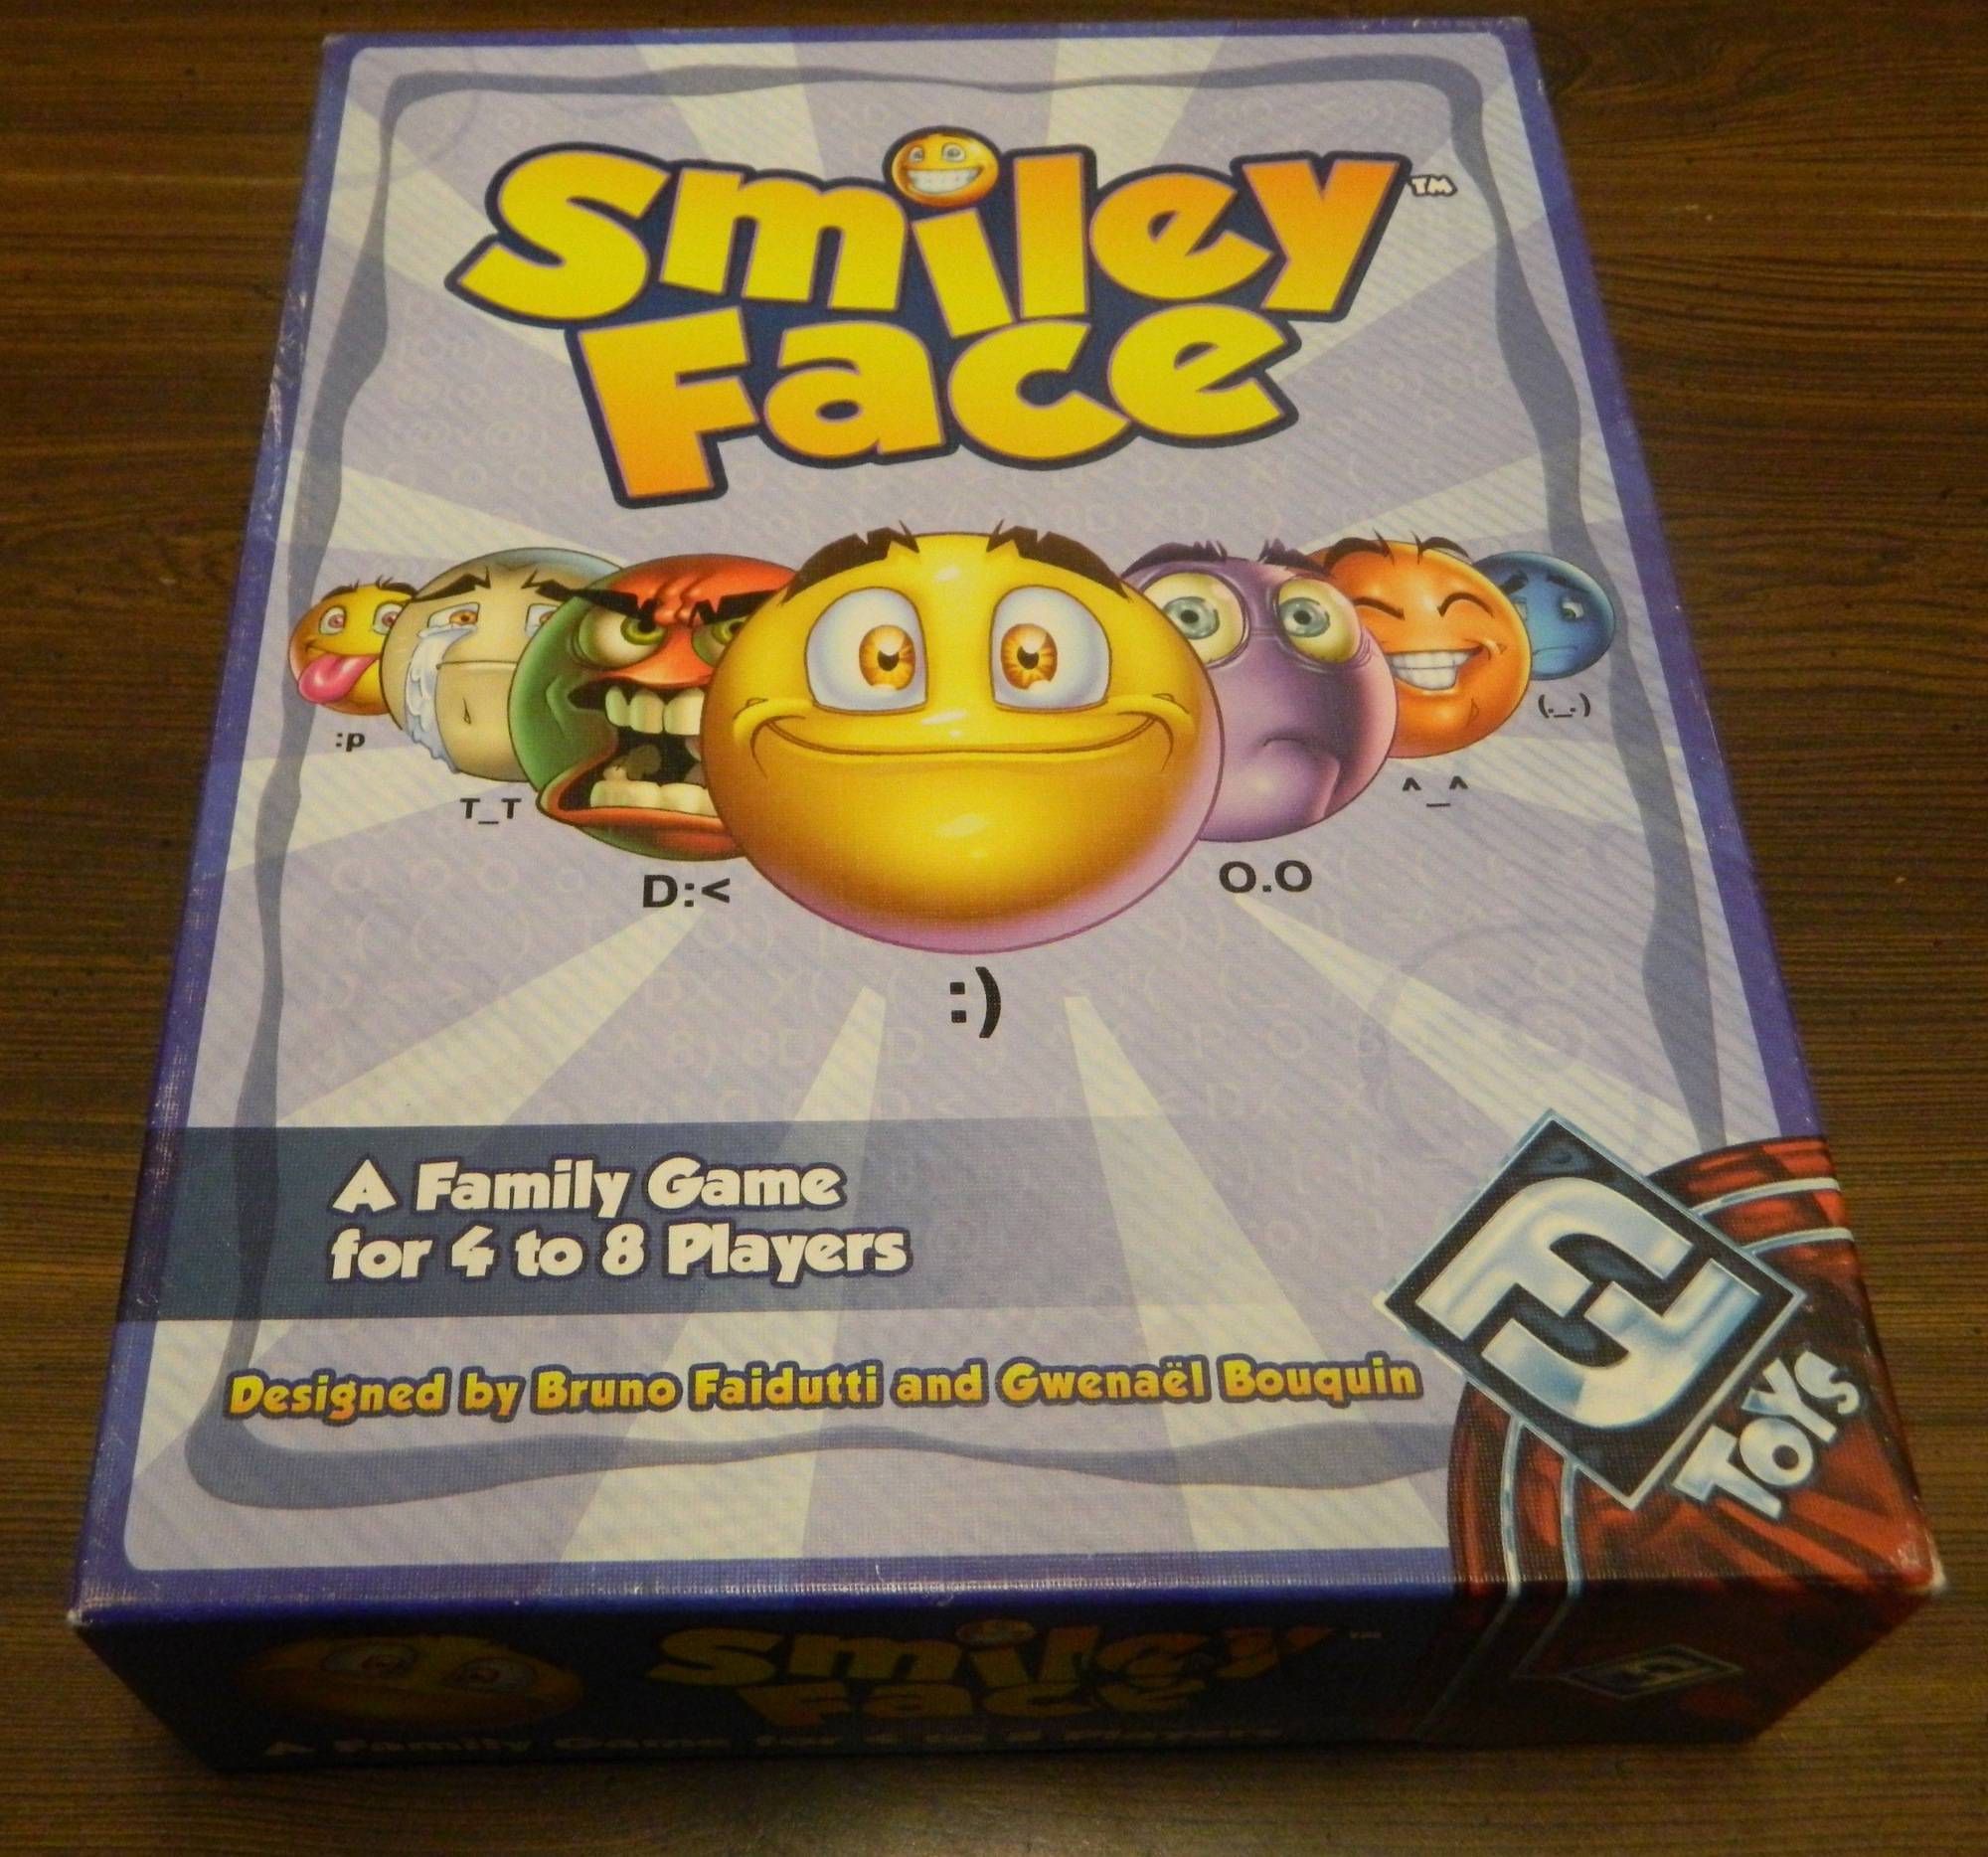 Box for Smiley Face